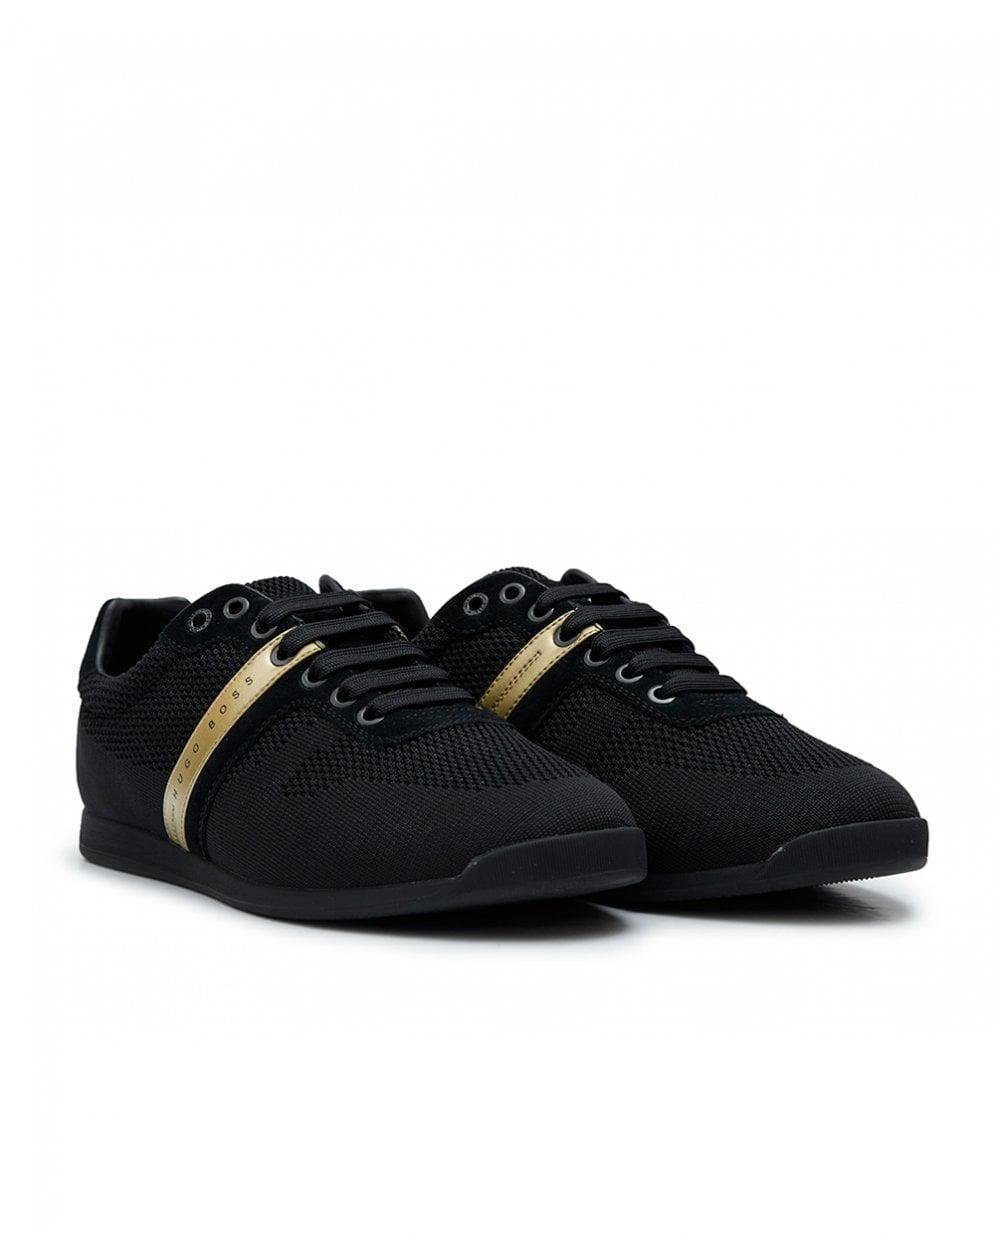 black and gold hugo boss trainers off 